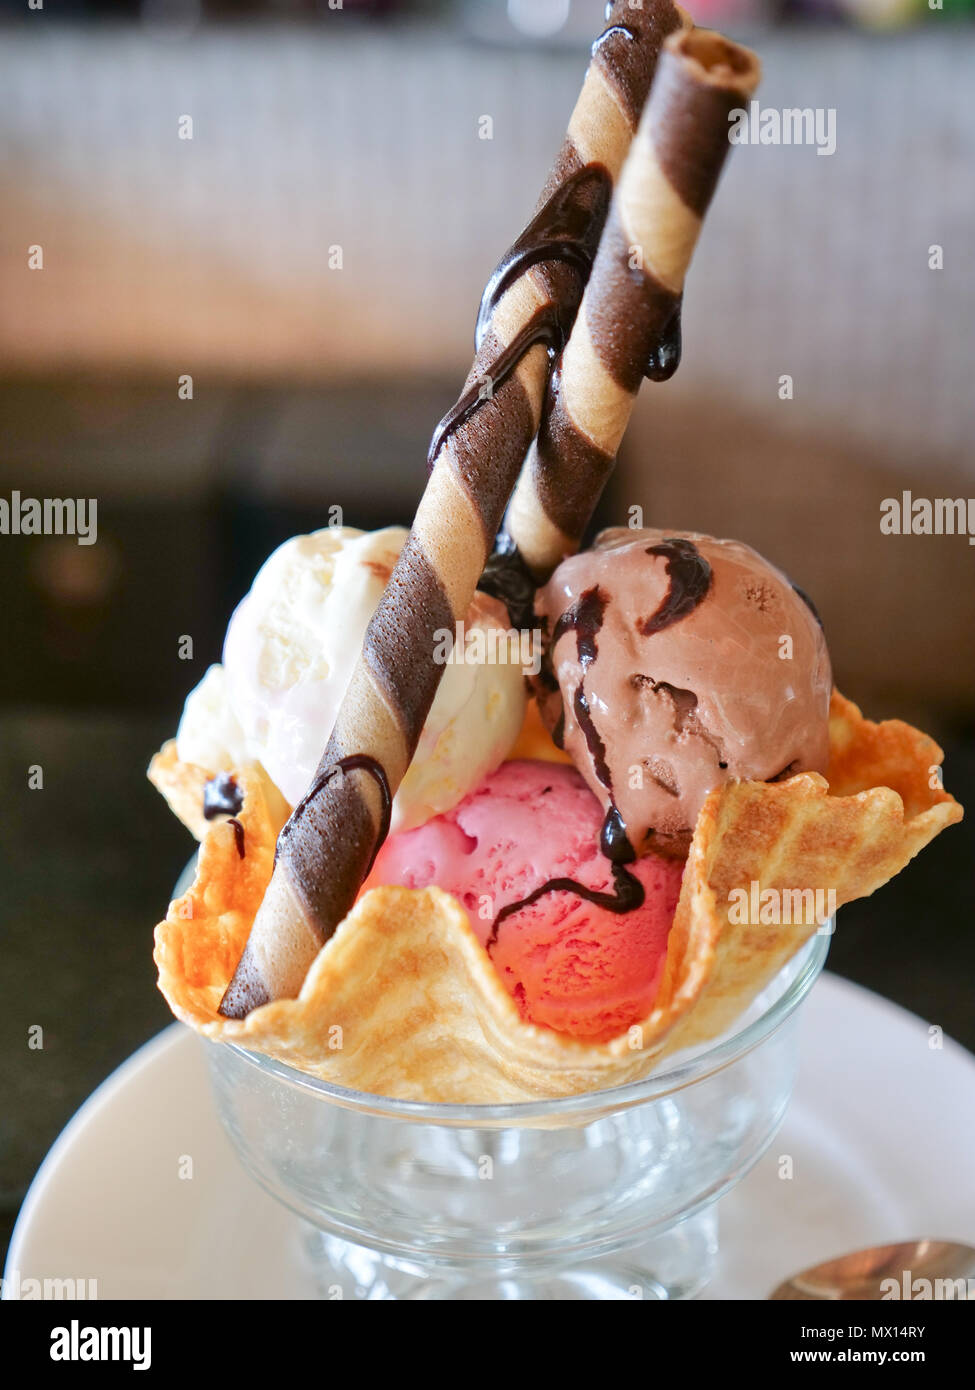 https://c8.alamy.com/comp/MX14RY/mixed-ice-cream-scoops-in-wafer-bowl-dessert-sundae-with-neapolitan-flavors-of-ice-cream-glass-dish-with-scoops-of-chocolate-vanilla-and-strawberry-ice-cream-with-rolled-cookie-biscuits-and-garnishes-MX14RY.jpg